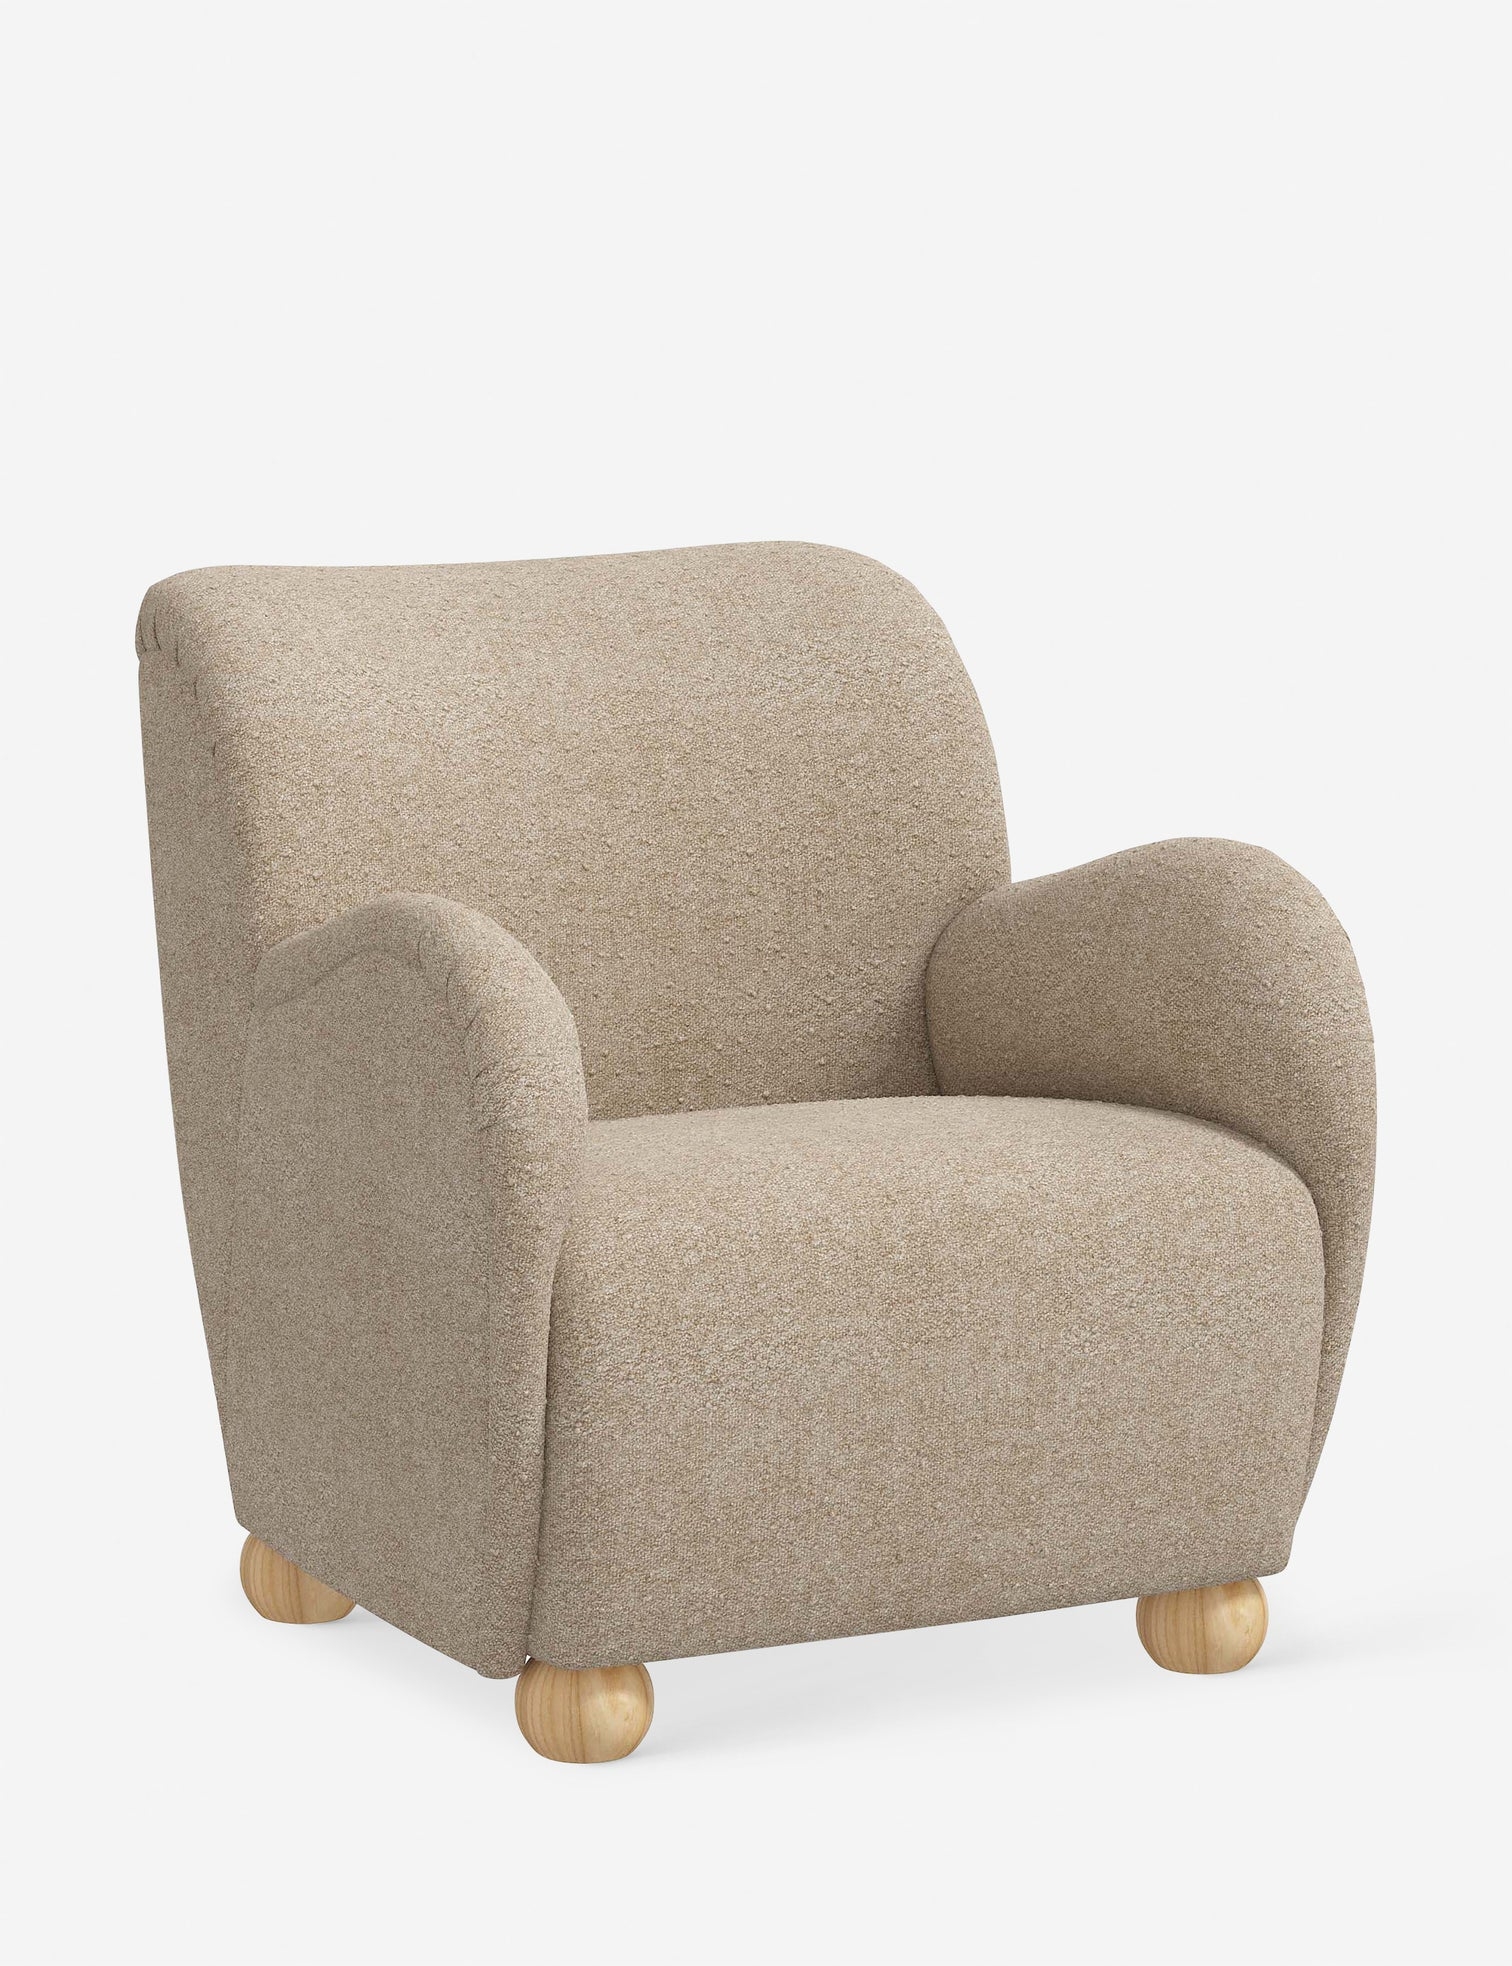 Baird Accent Chair - Image 0